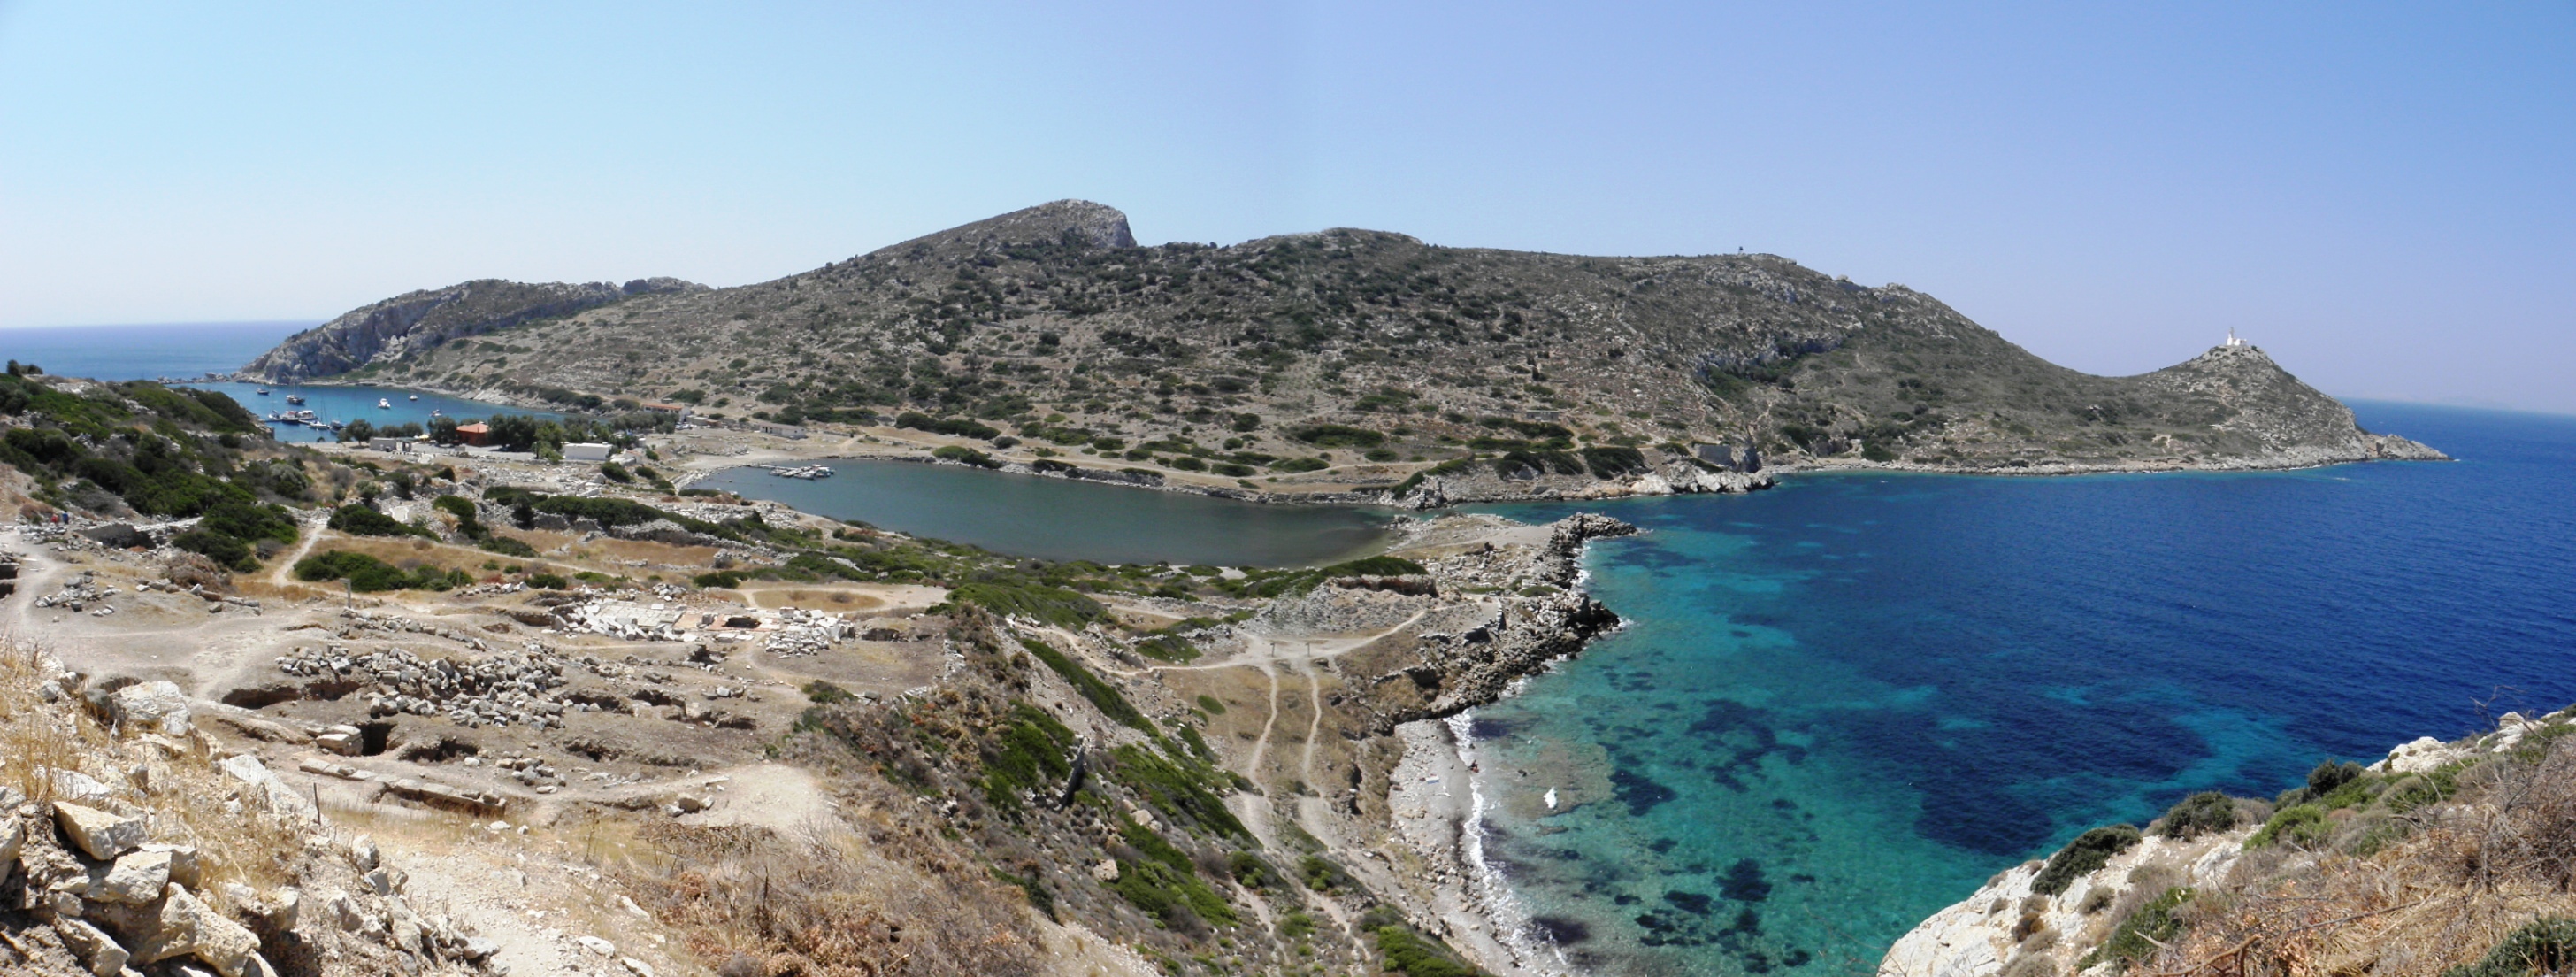 Remains of the ancient port of knidos photo